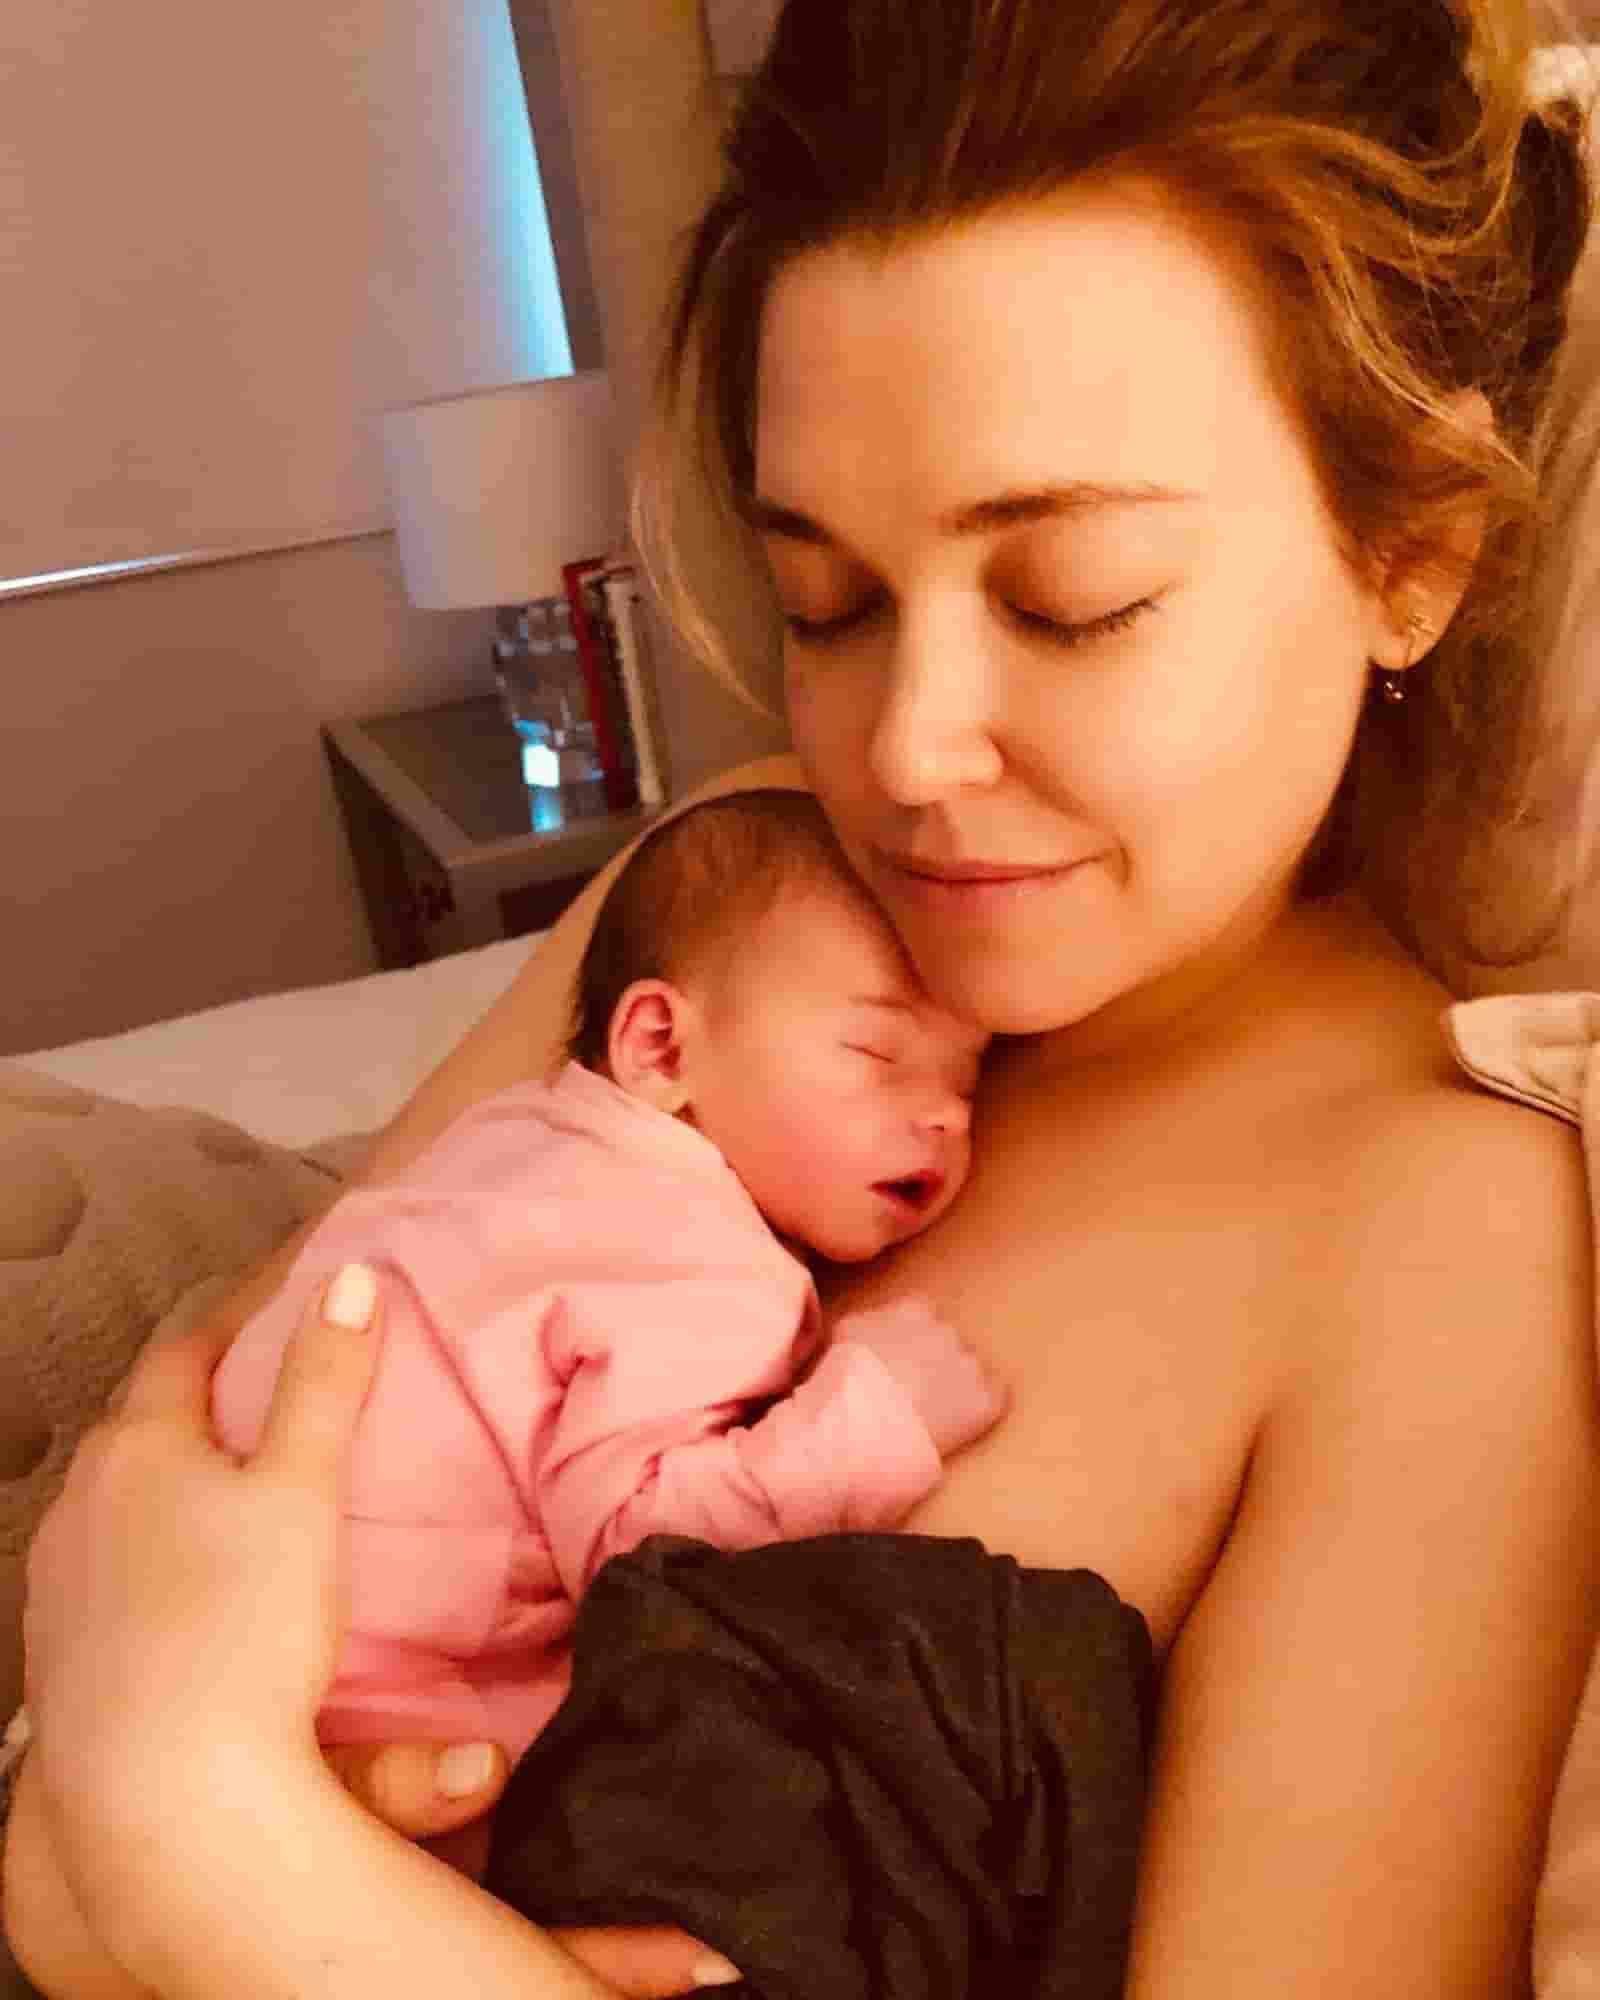 Rachel Platten and Kevin Lazan have weclomed a baby daughter, Violet Skye LazanSource: People